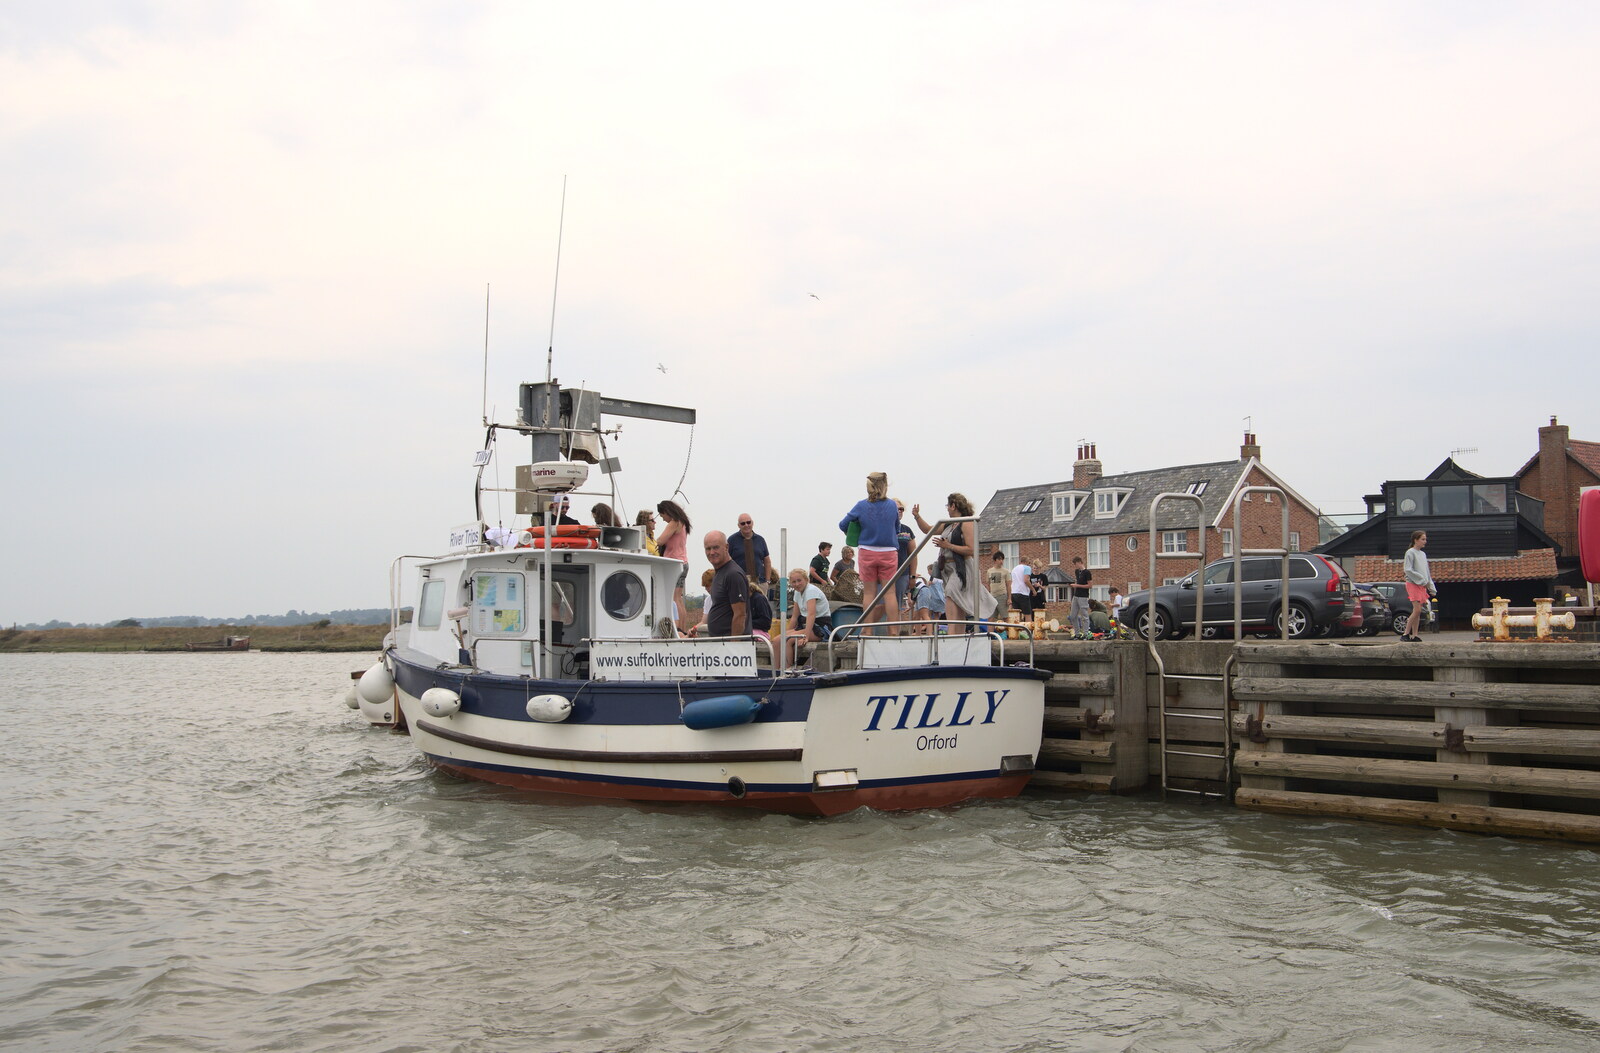 The river boat Tilly is moored up after a trip from A Trip to Orford Ness, Orford, Suffolk - 16th August 2022